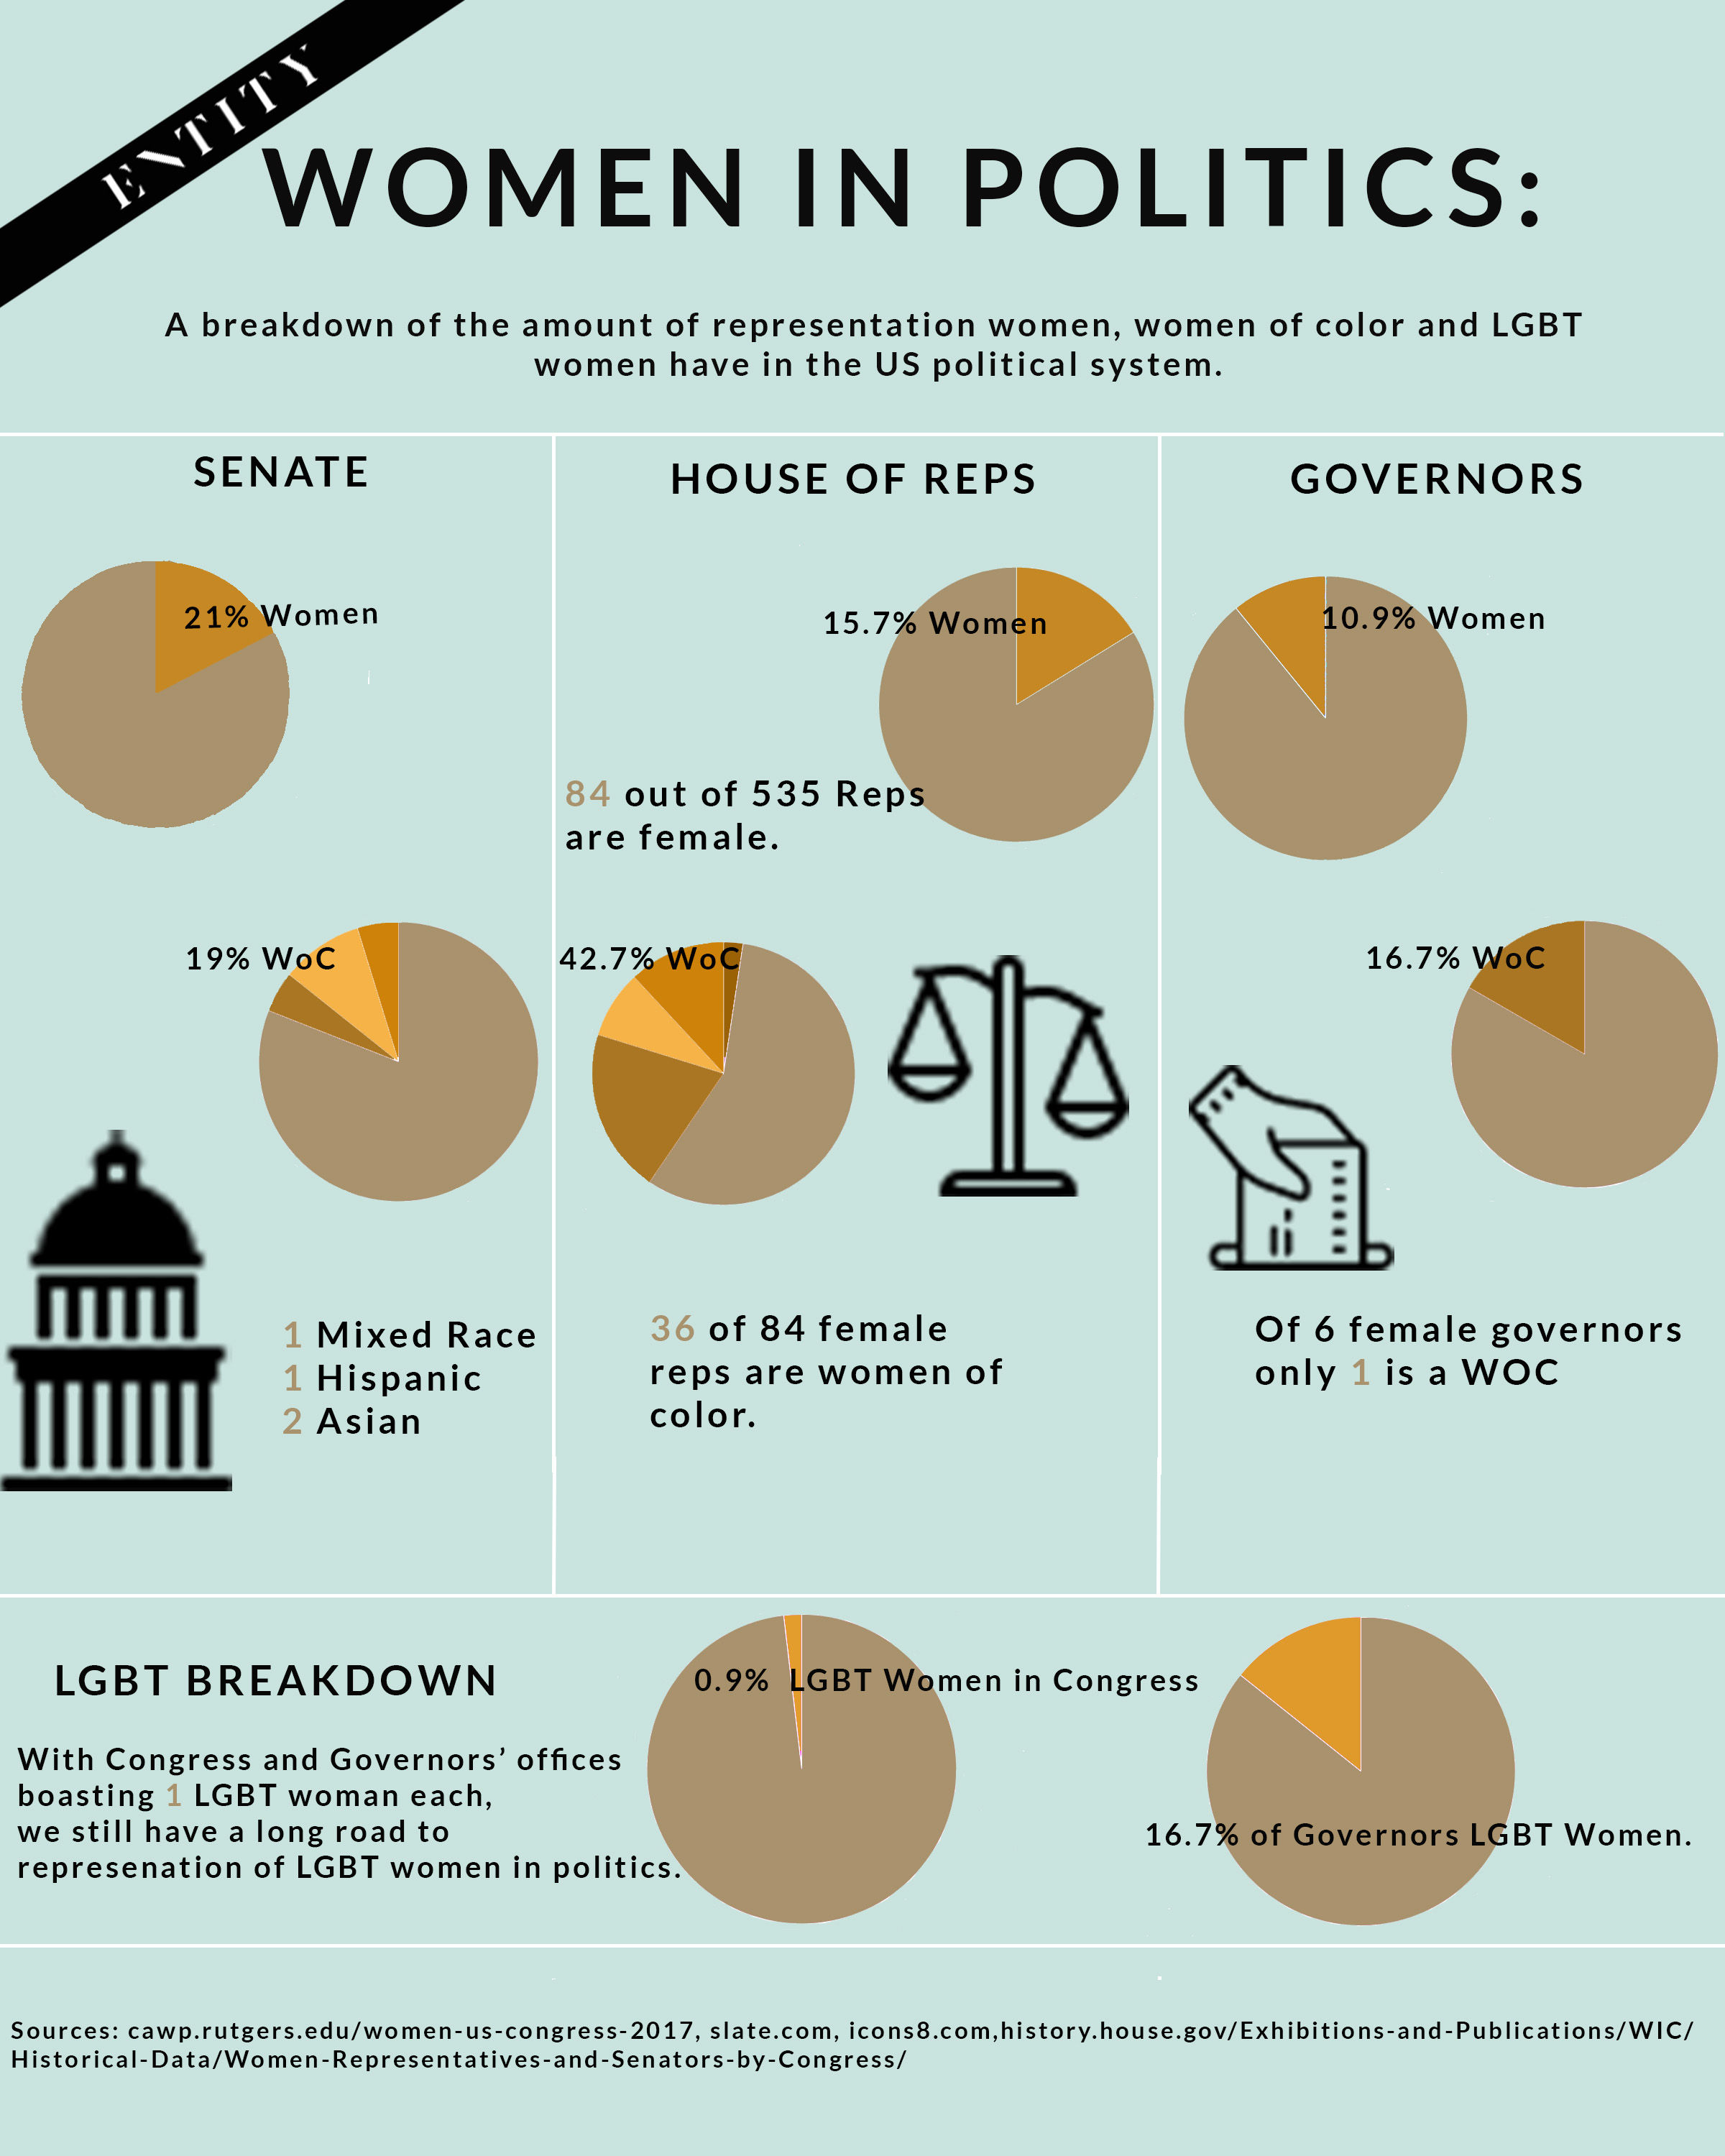 Entity magazines gives a detailed infographic describing the amount of women in government representing more than half of the population.